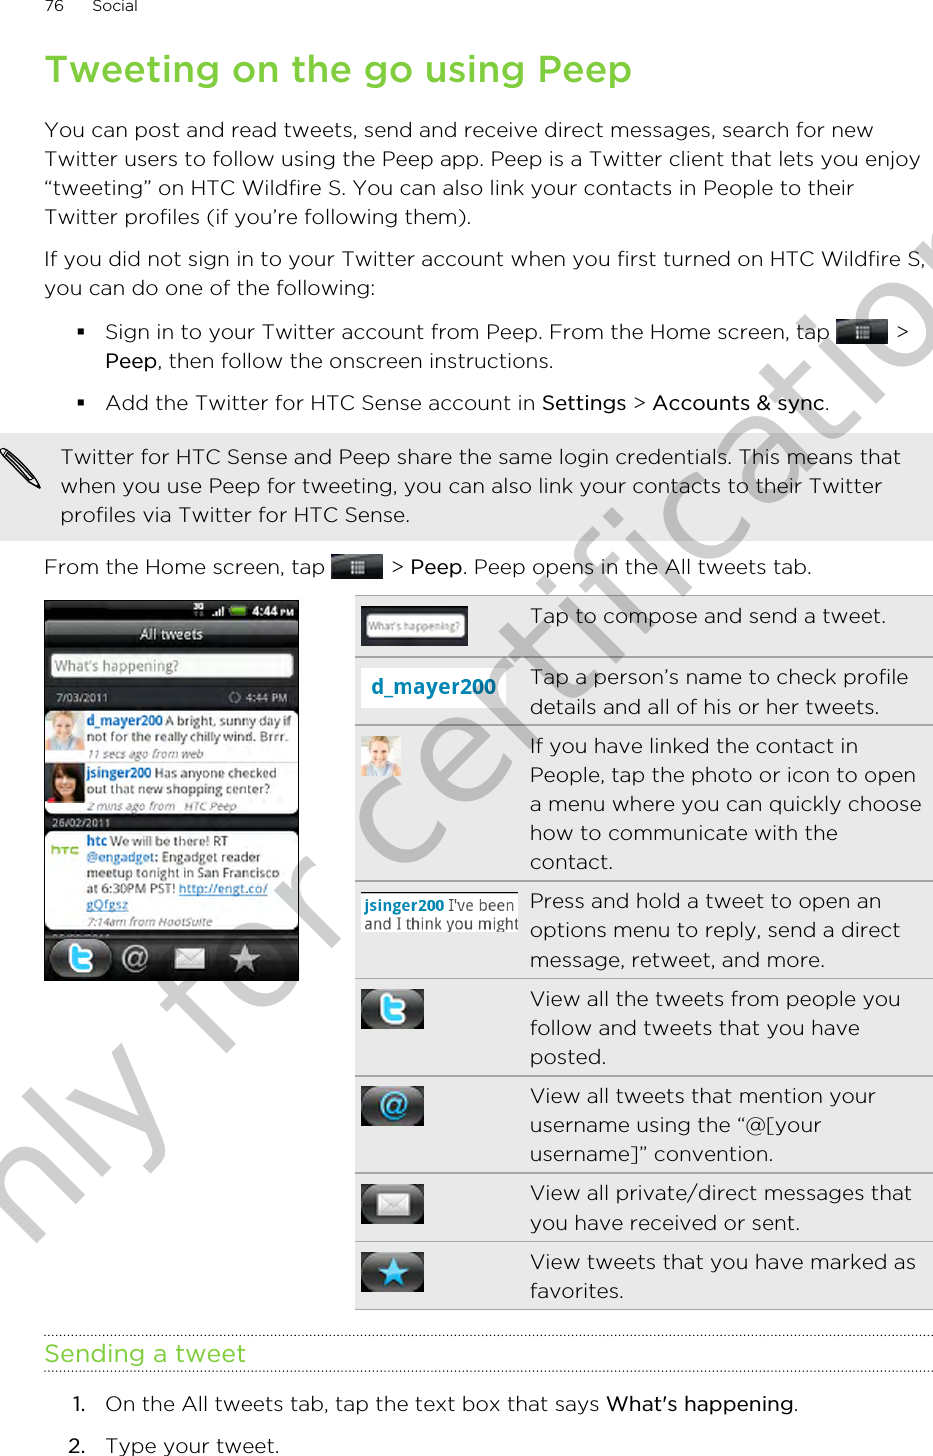 Tweeting on the go using PeepYou can post and read tweets, send and receive direct messages, search for newTwitter users to follow using the Peep app. Peep is a Twitter client that lets you enjoy“tweeting” on HTC Wildfire S. You can also link your contacts in People to theirTwitter profiles (if you’re following them).If you did not sign in to your Twitter account when you first turned on HTC Wildfire S,you can do one of the following:§Sign in to your Twitter account from Peep. From the Home screen, tap   &gt;Peep, then follow the onscreen instructions.§Add the Twitter for HTC Sense account in Settings &gt; Accounts &amp; sync.Twitter for HTC Sense and Peep share the same login credentials. This means thatwhen you use Peep for tweeting, you can also link your contacts to their Twitterprofiles via Twitter for HTC Sense.From the Home screen, tap   &gt; Peep. Peep opens in the All tweets tab.Tap to compose and send a tweet.Tap a person’s name to check profiledetails and all of his or her tweets.If you have linked the contact inPeople, tap the photo or icon to opena menu where you can quickly choosehow to communicate with thecontact.Press and hold a tweet to open anoptions menu to reply, send a directmessage, retweet, and more.View all the tweets from people youfollow and tweets that you haveposted.View all tweets that mention yourusername using the “@[yourusername]” convention.View all private/direct messages thatyou have received or sent.View tweets that you have marked asfavorites.Sending a tweet1. On the All tweets tab, tap the text box that says What&apos;s happening.2. Type your tweet.76 SocialOnly for certification